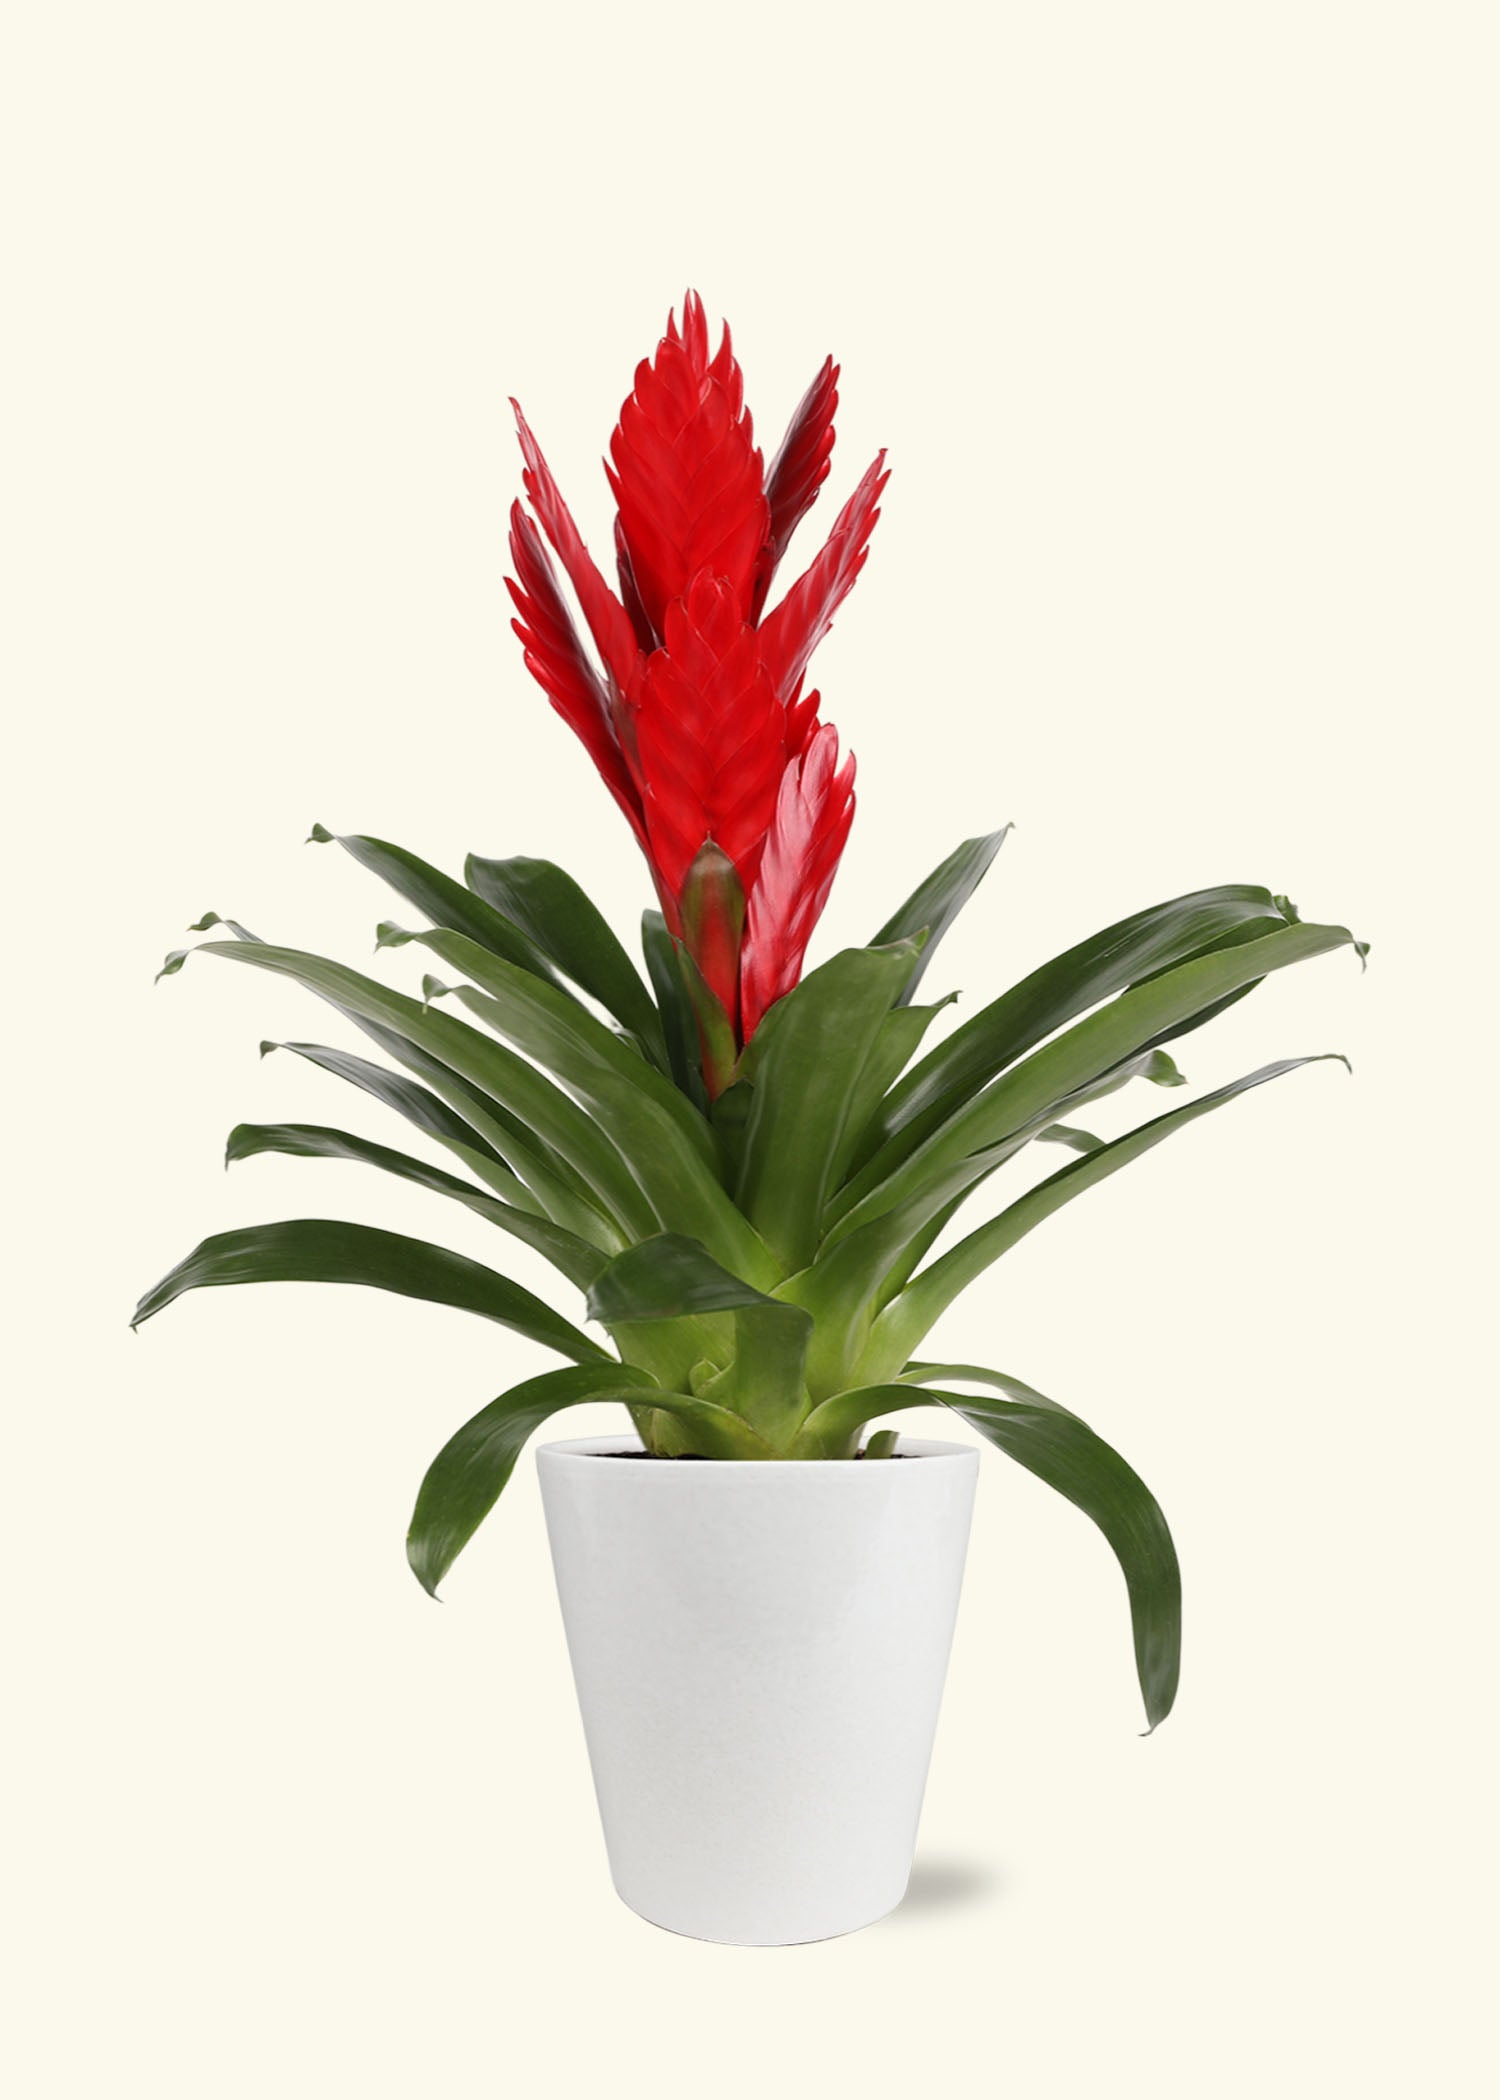 Small Red Bromeliad in a white quinn ceramic grow pot.